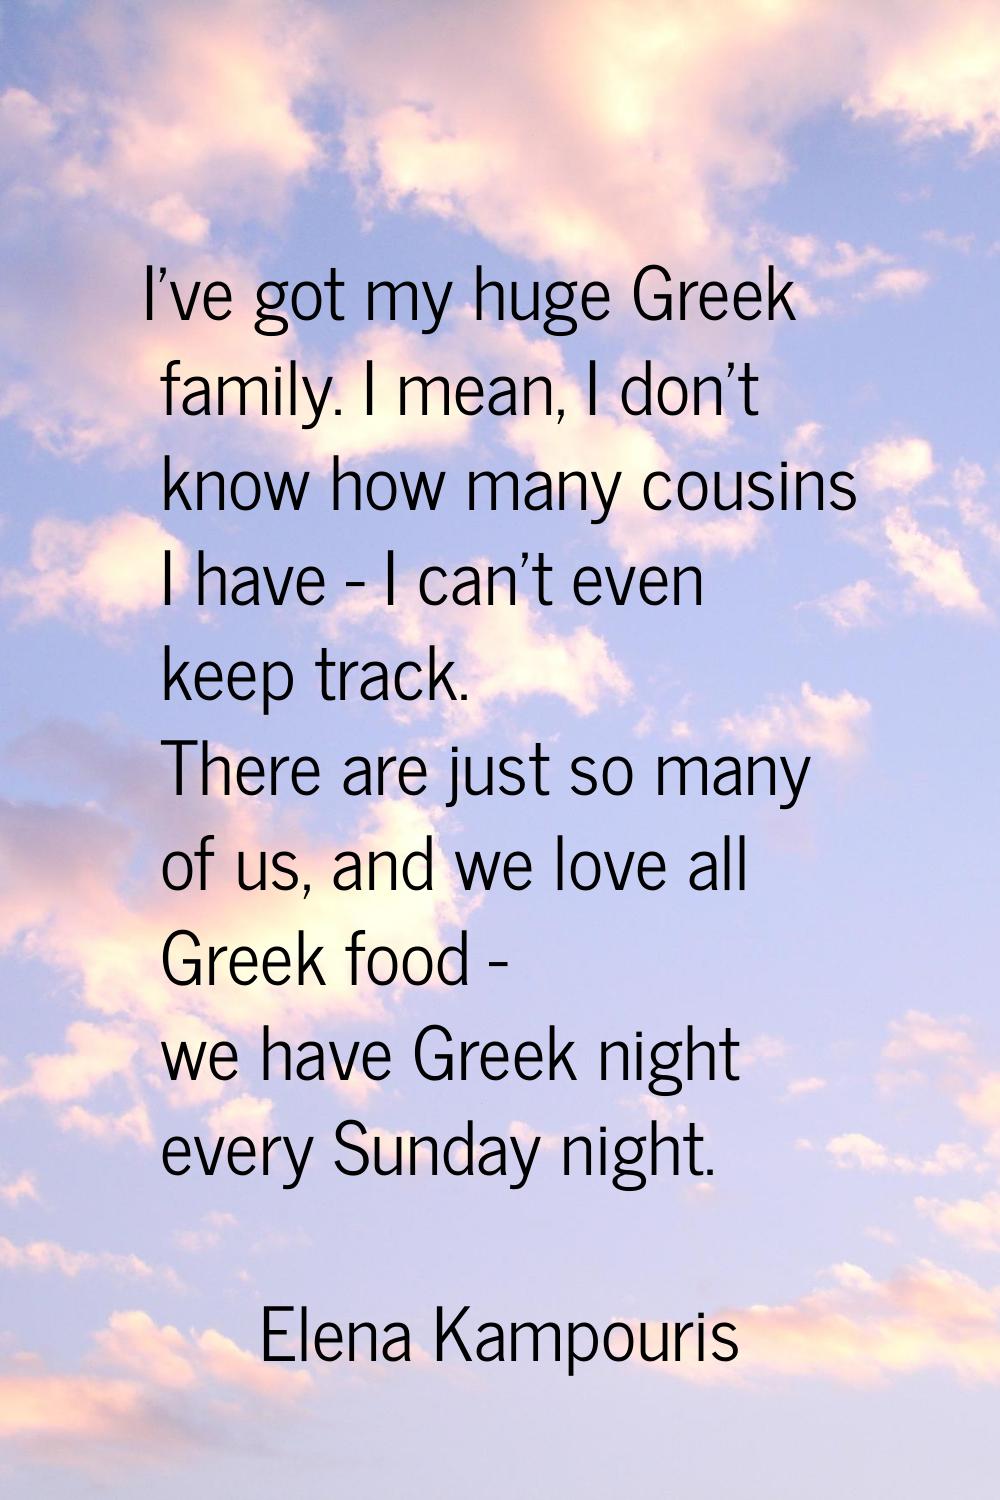 I've got my huge Greek family. I mean, I don't know how many cousins I have - I can't even keep tra